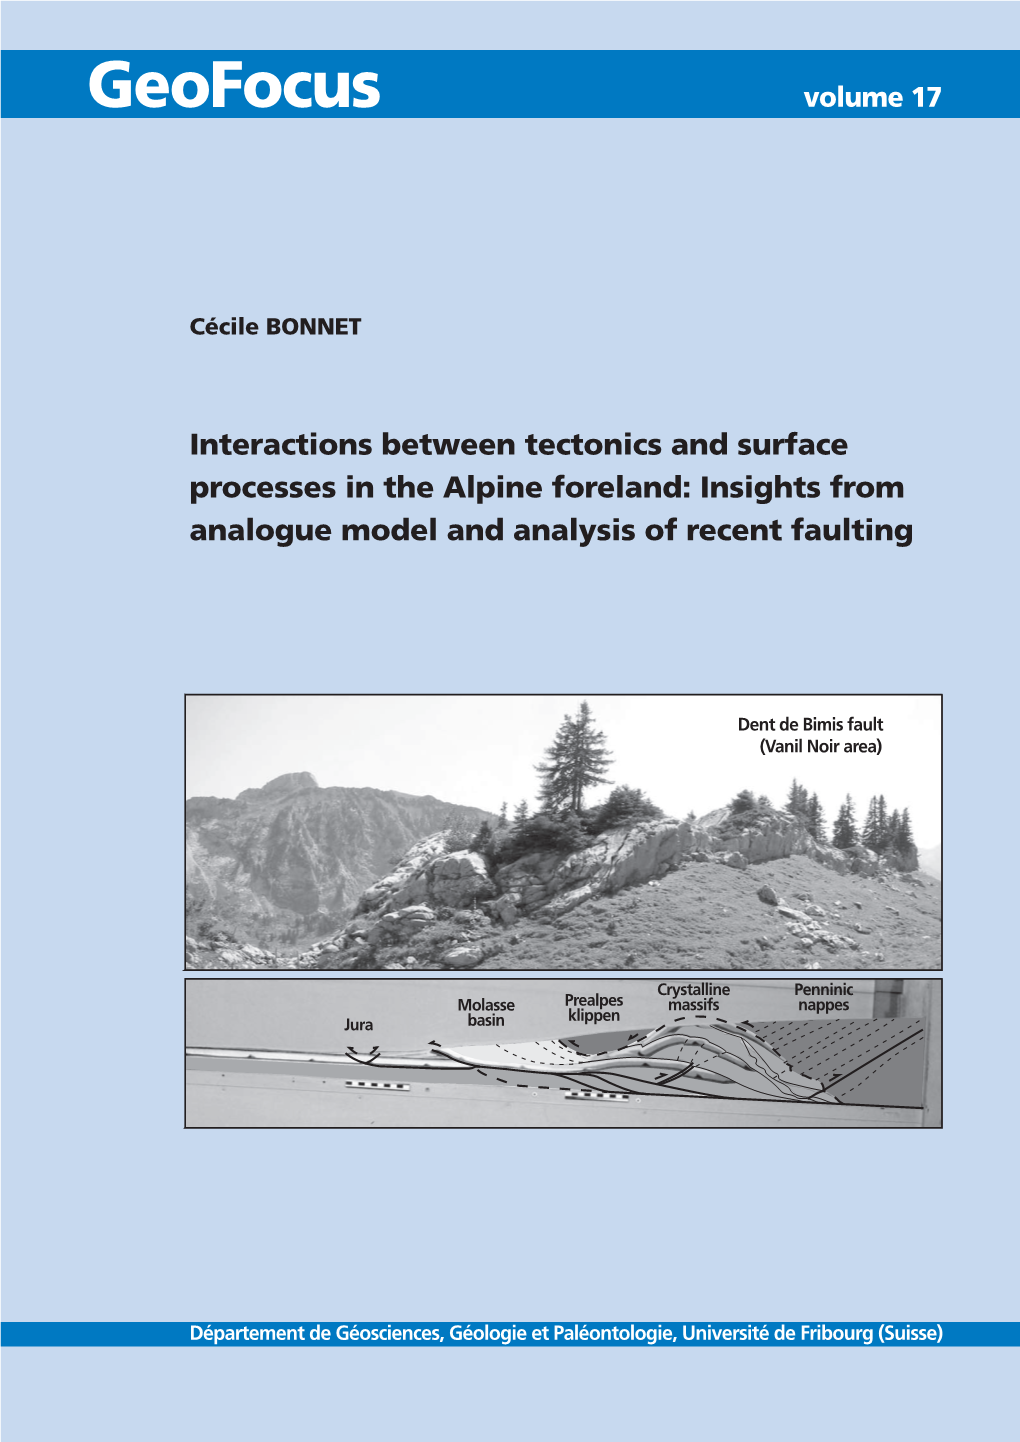 Interactions Between Tectonics and Surface Processes in the Alpine Foreland: Insights from Analogue Model and Analysis of Recent Faulting